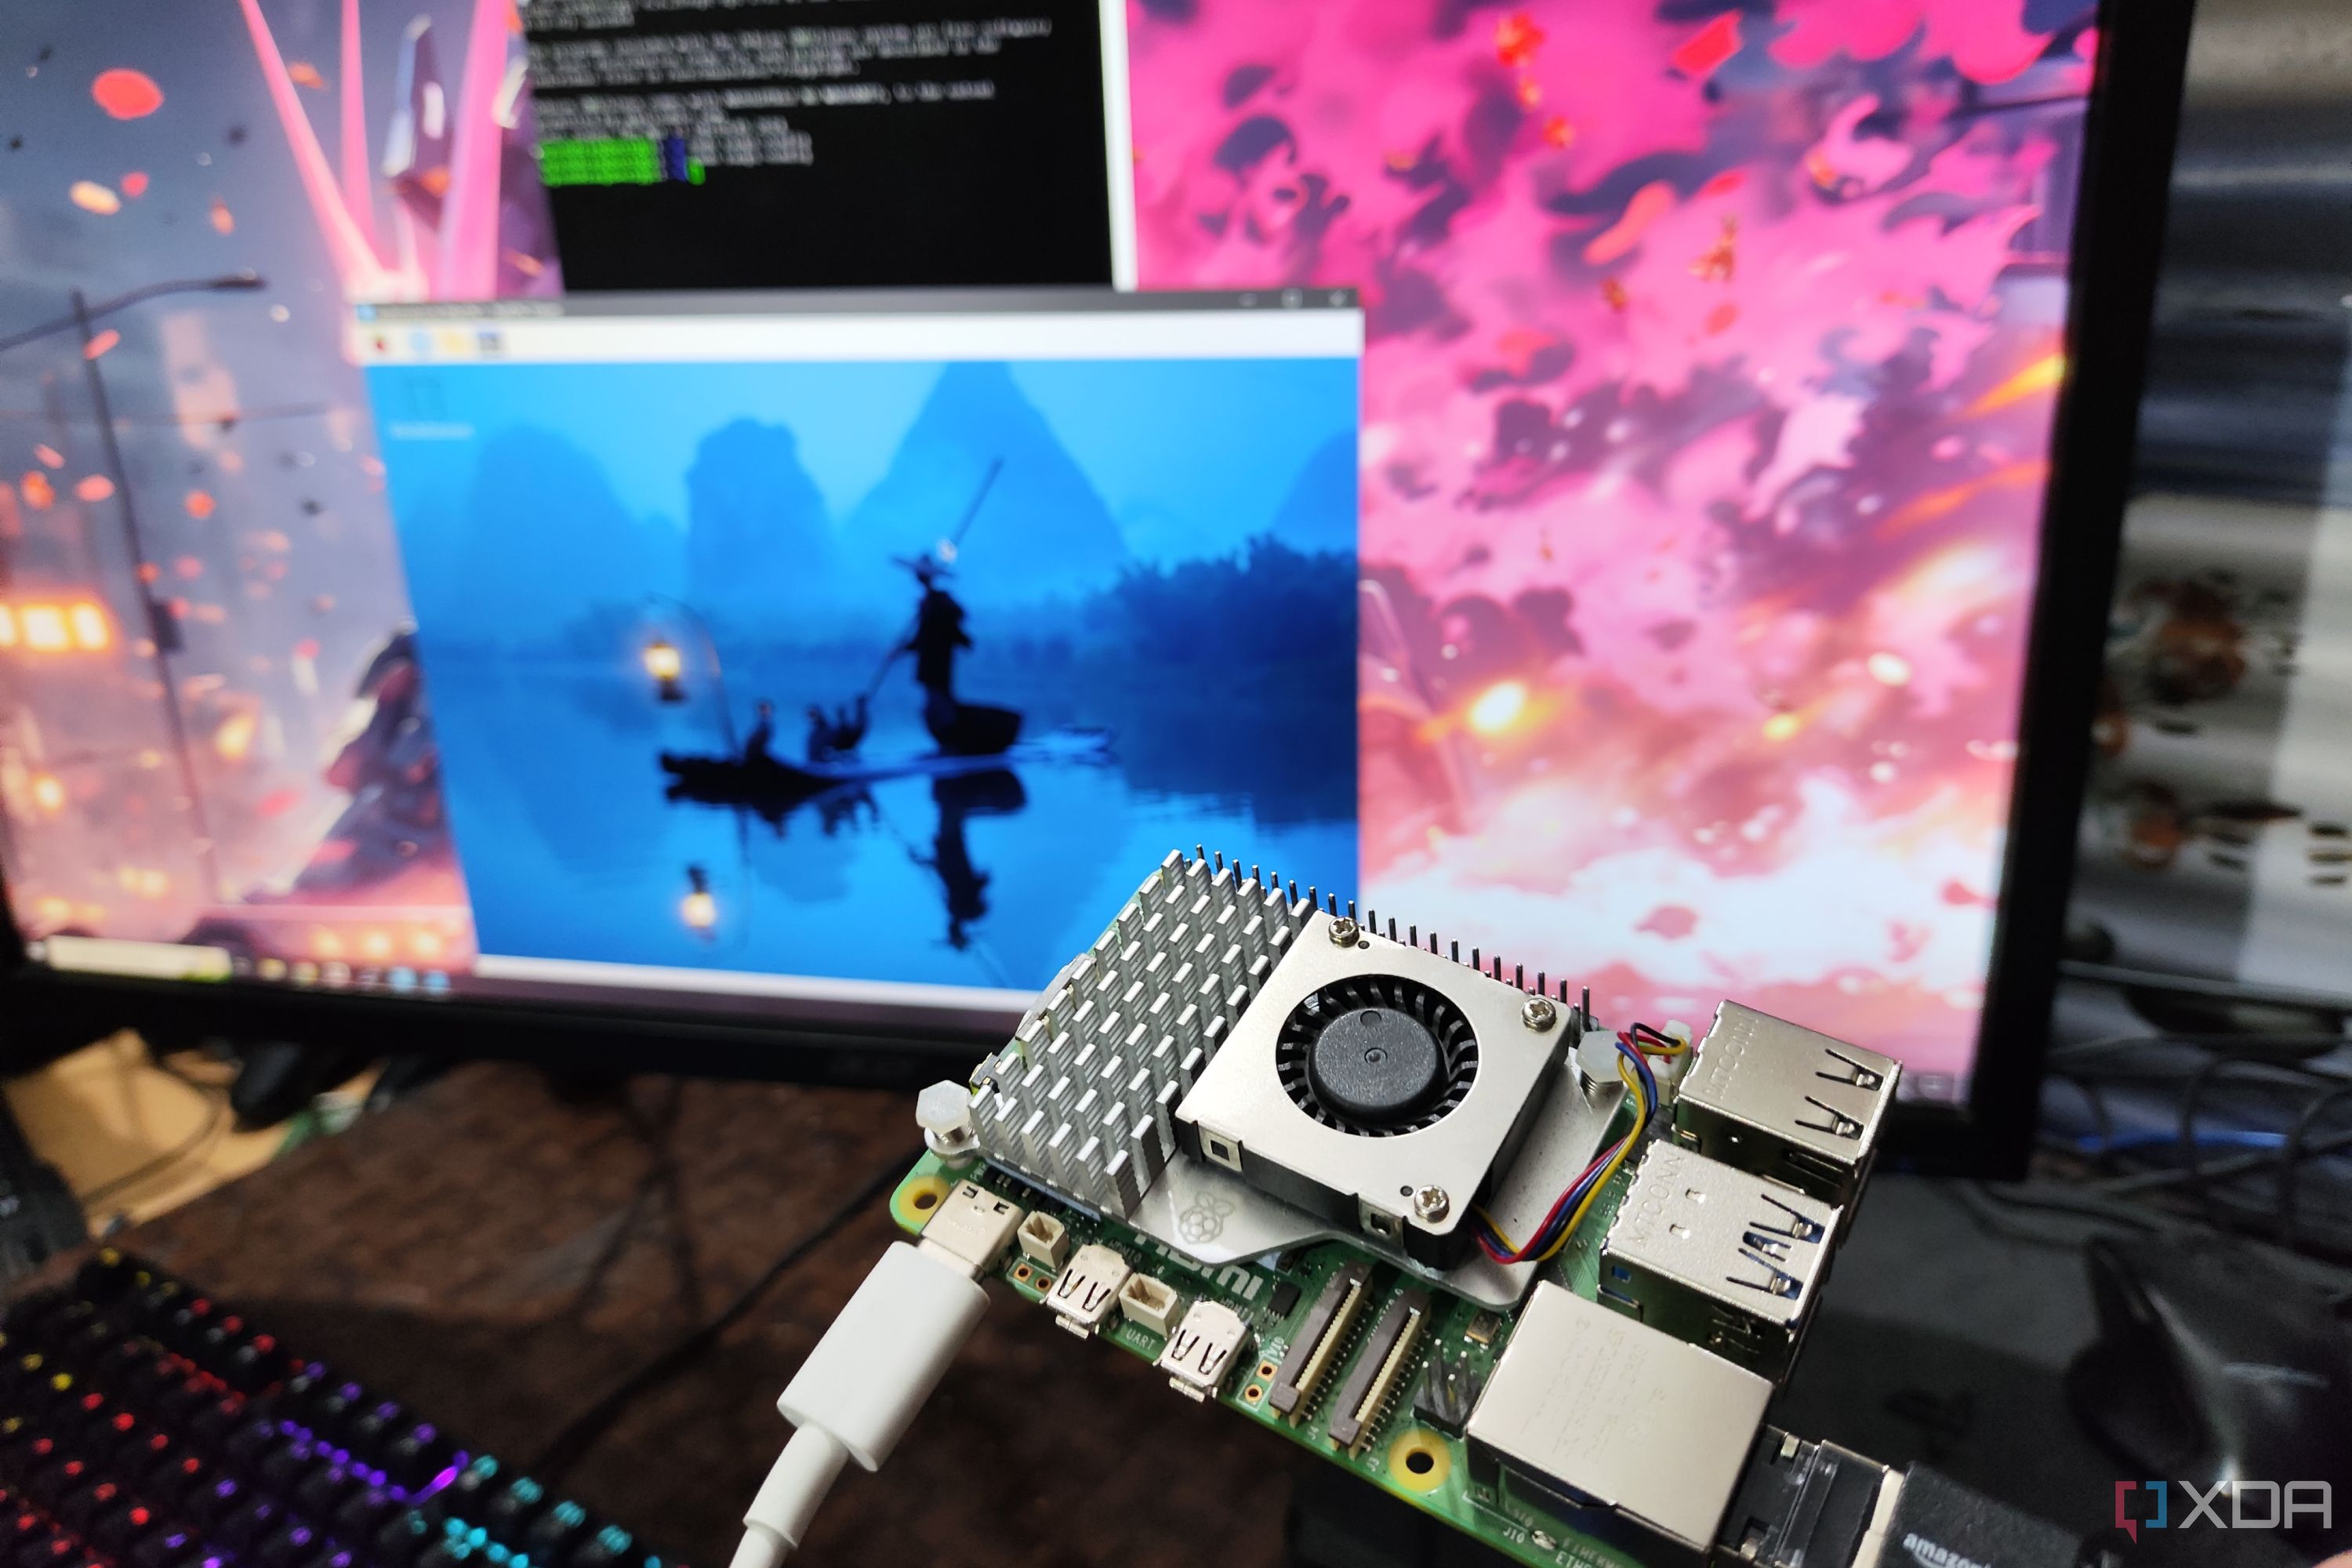 A headless Raspberry Pi, with PuTTY and RealVNC Viewer running on a monitor in the background